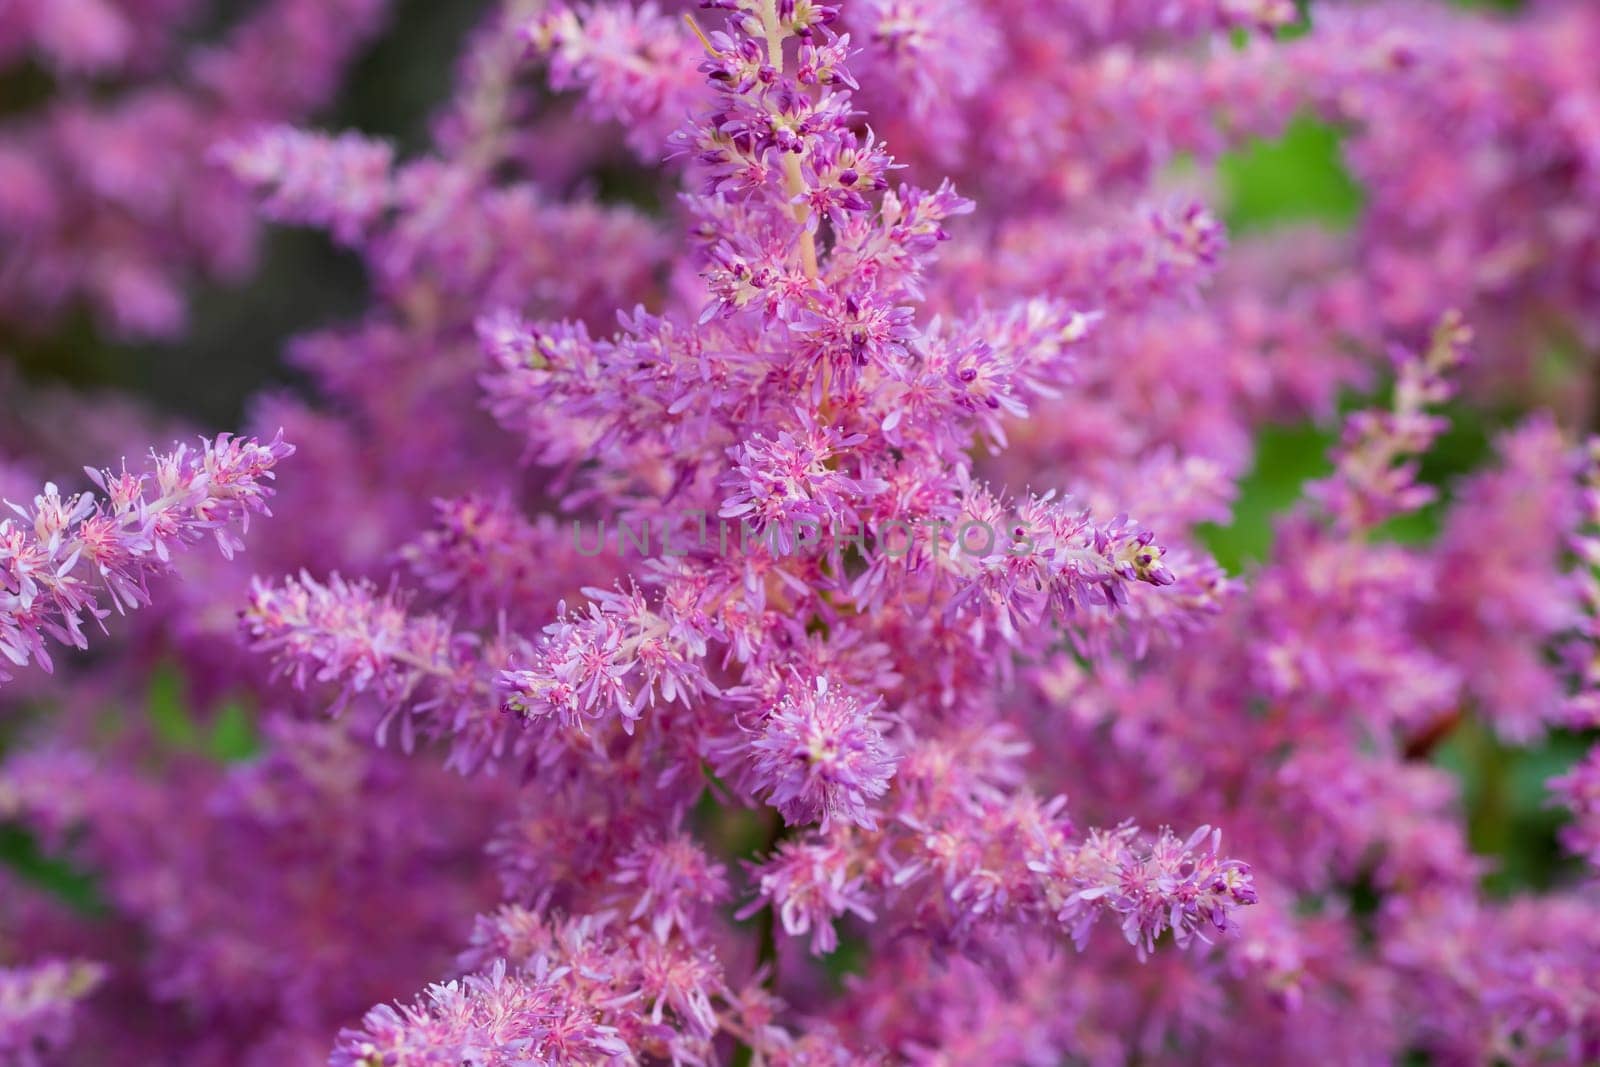 Blooming pink astilbes in a flower bed in the garden, close-up by galsand